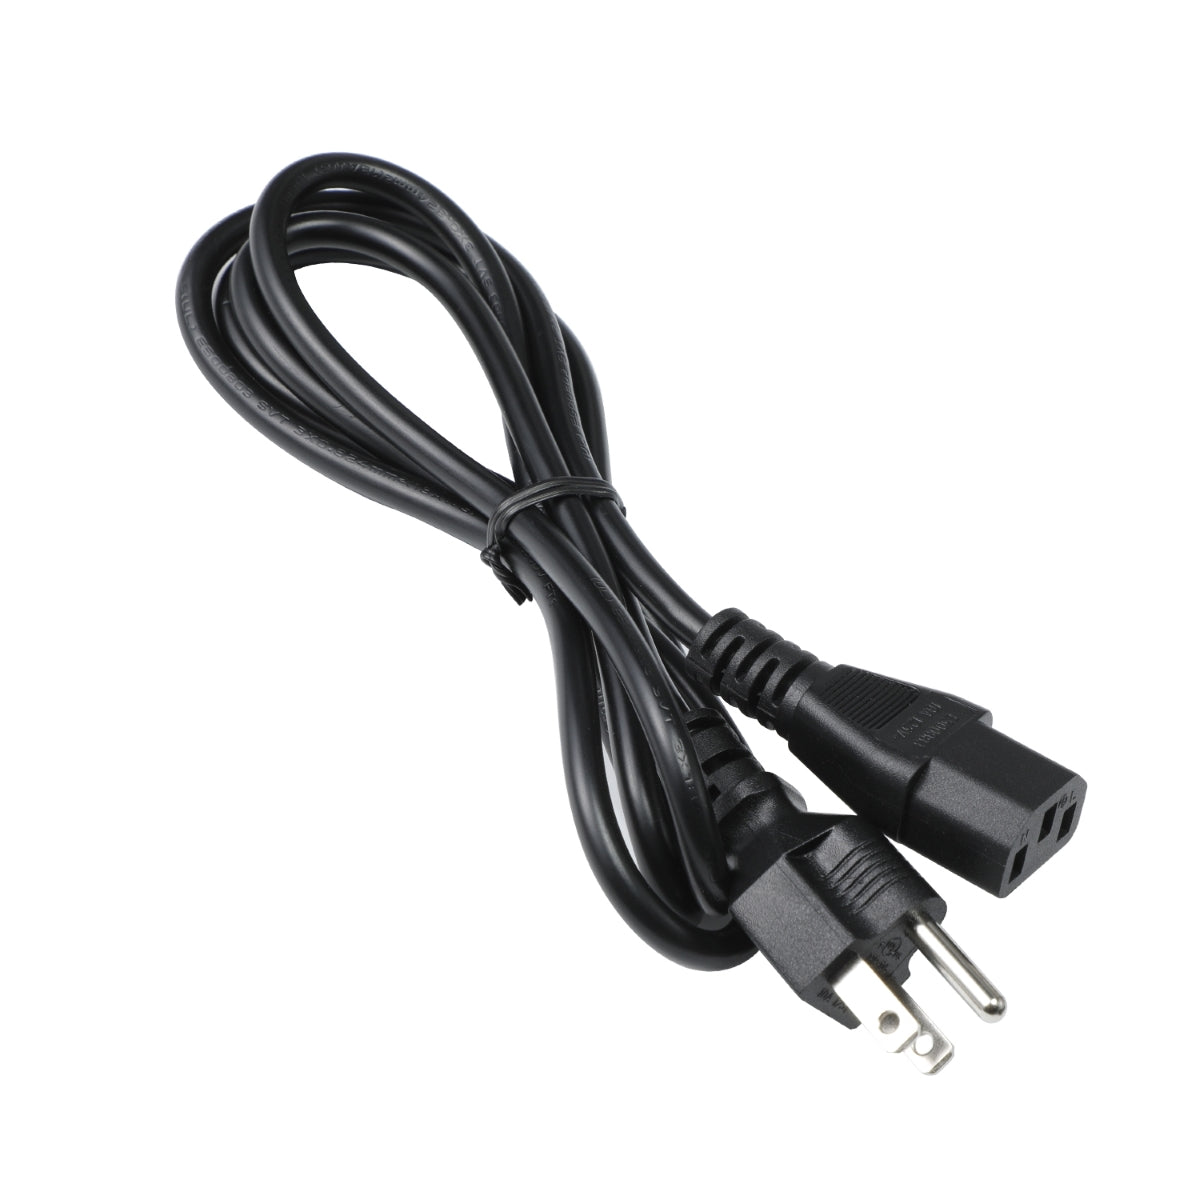 Power Cord for Dell P2419H Monitor.